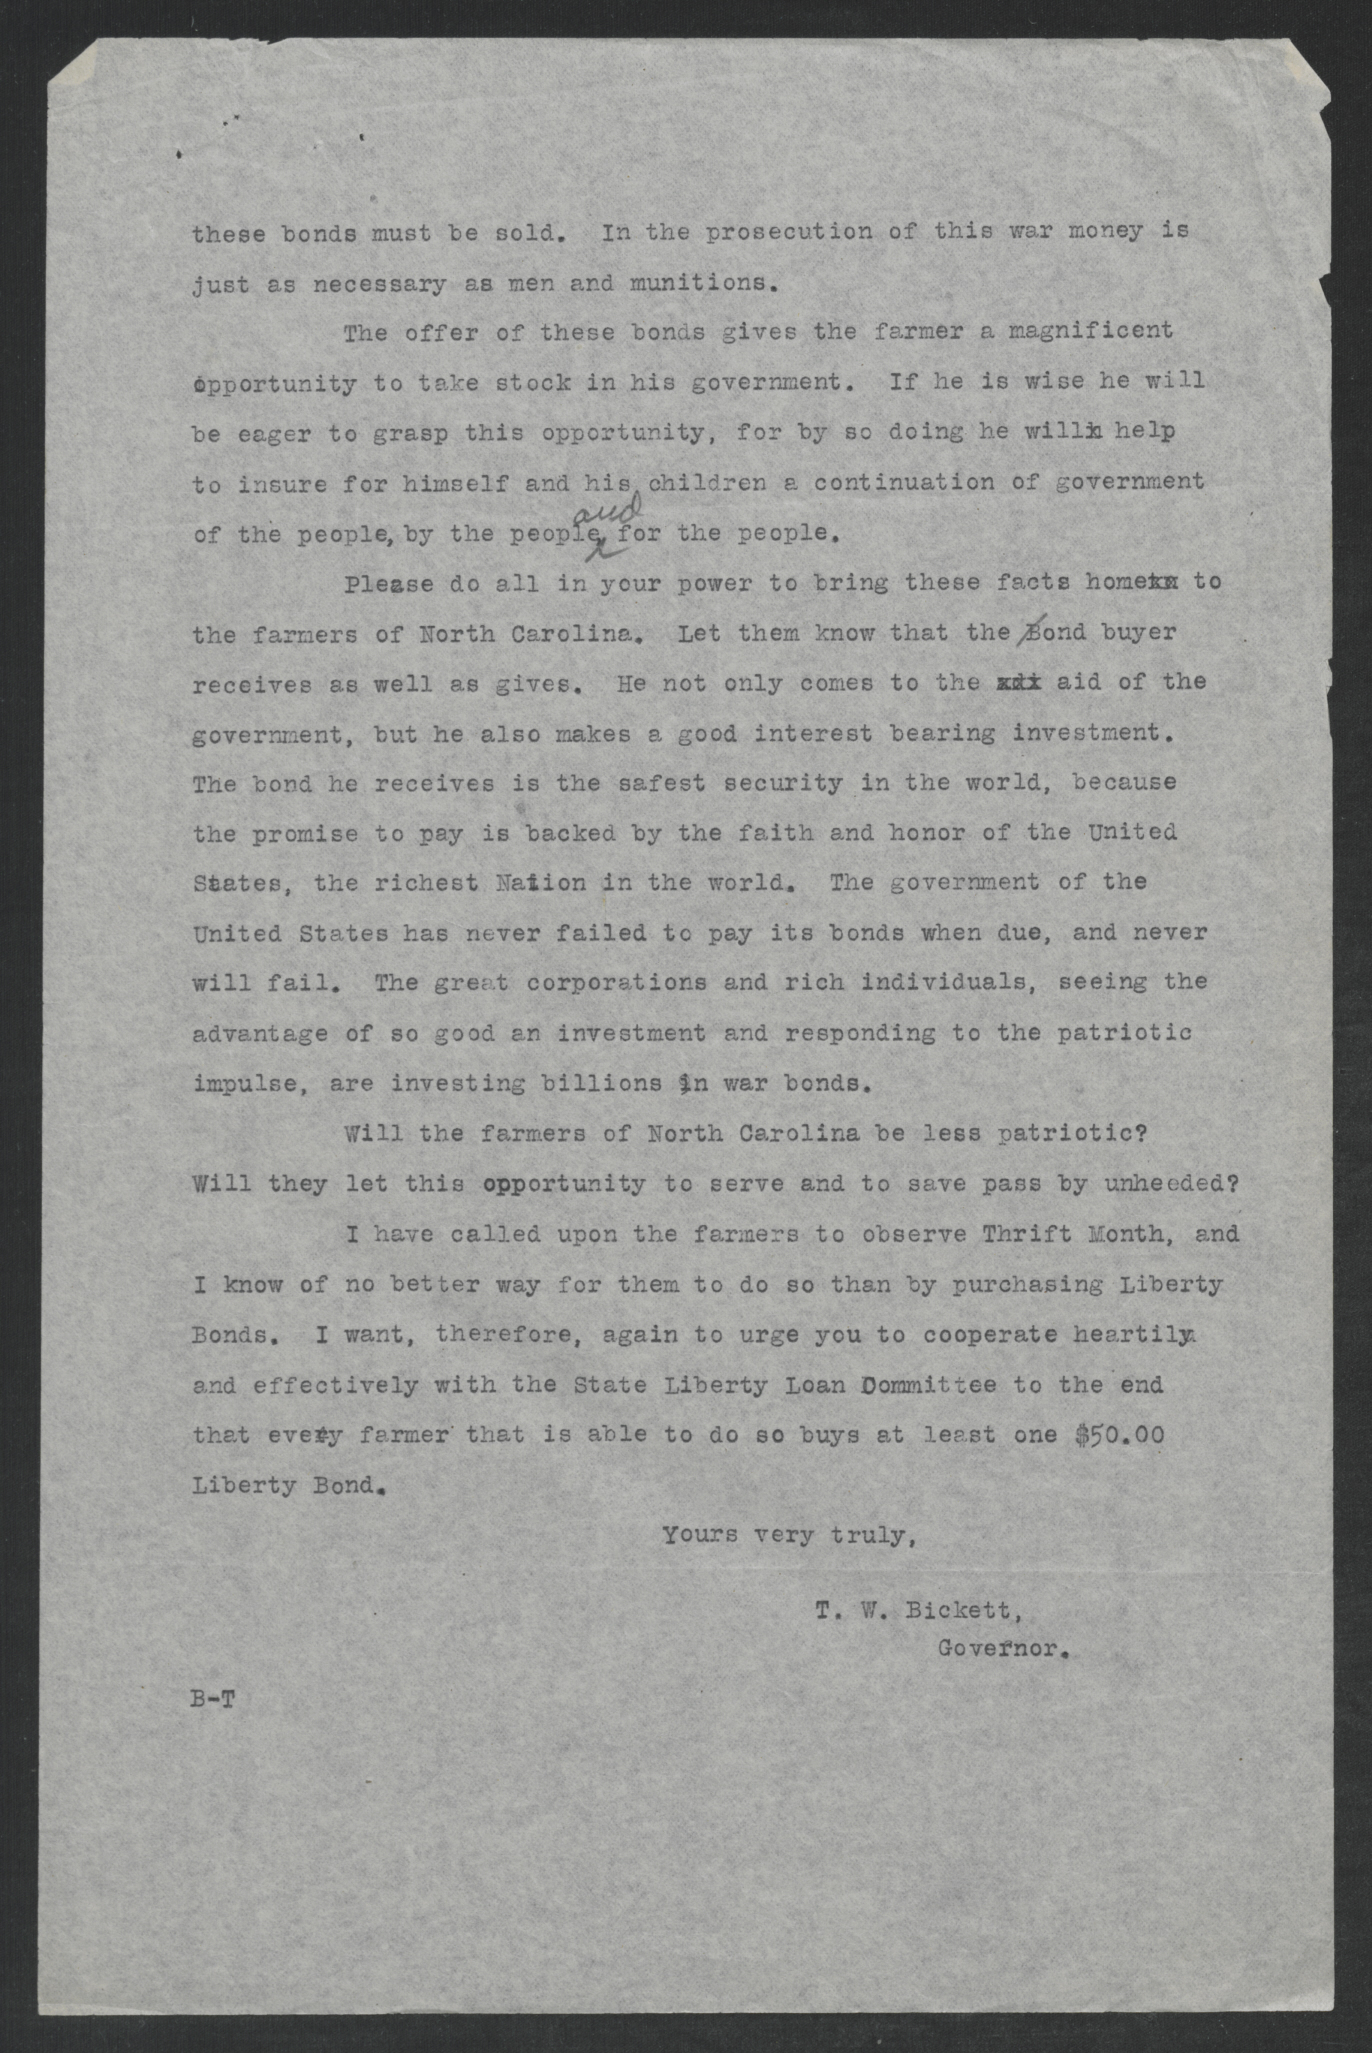 Letter from Thomas W. Bickett to Henry Q. Alexander, October 15, 1917, page 2